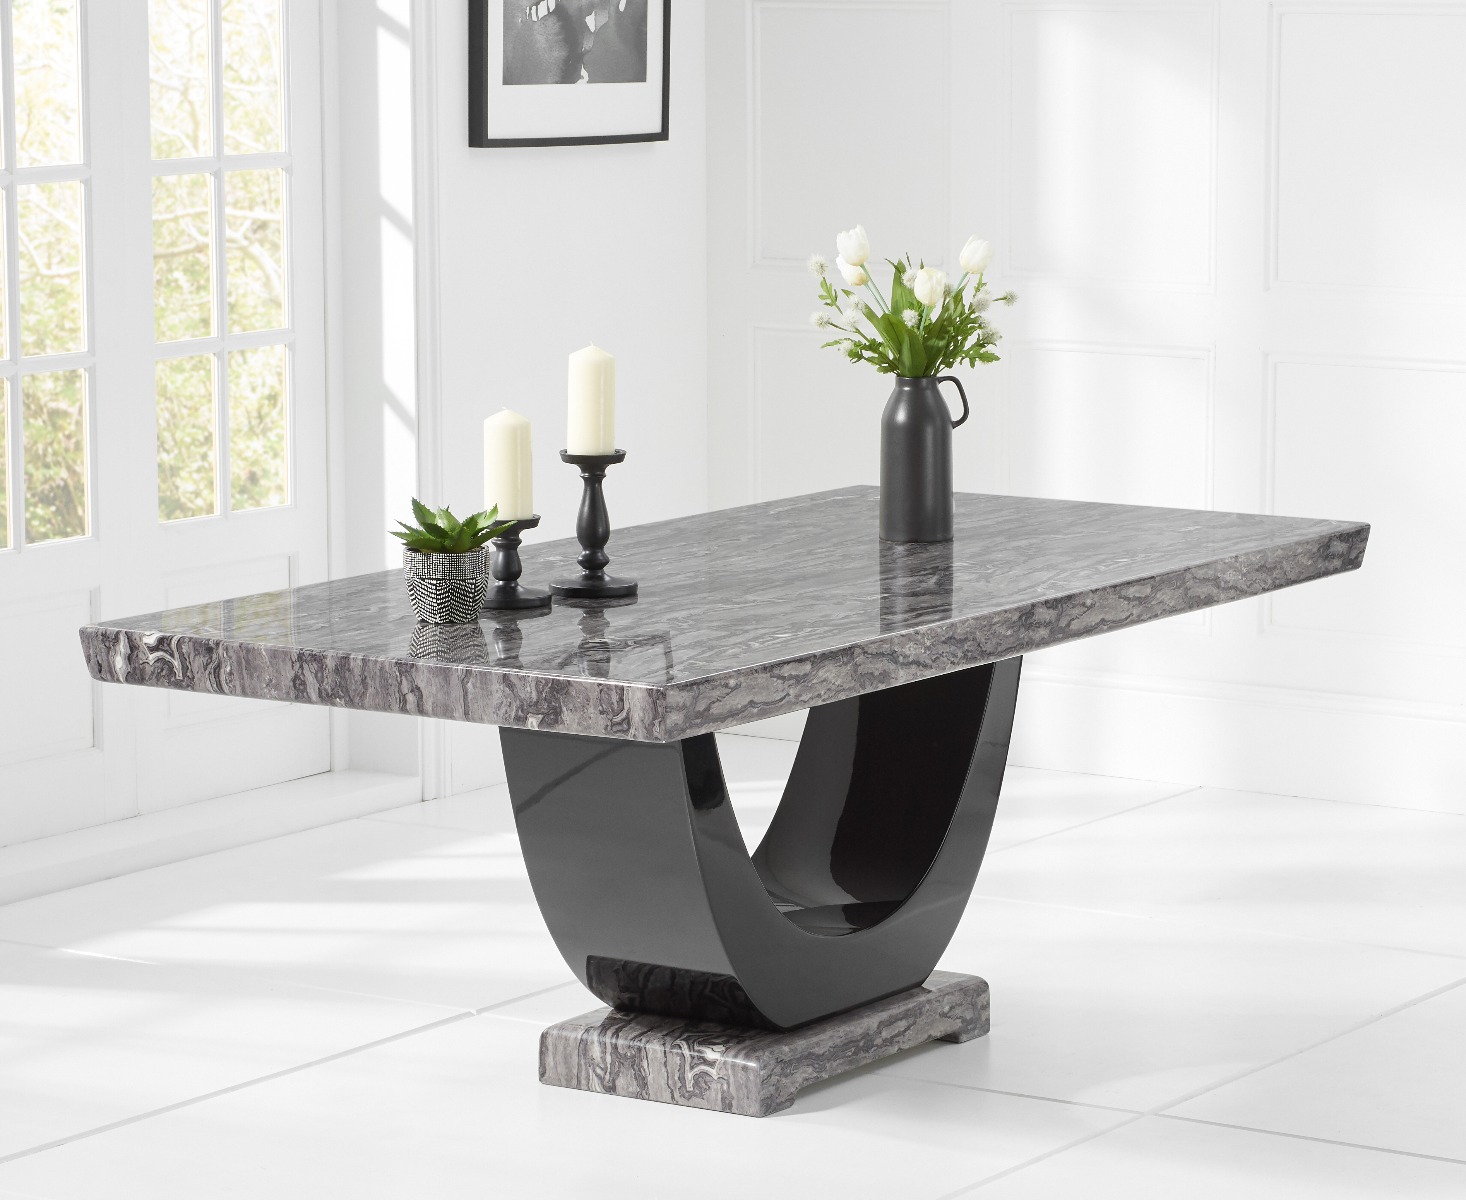 Photo 4 of Raphael 200cm dark grey pedestal marble dining table with 10 grey francesca chairs